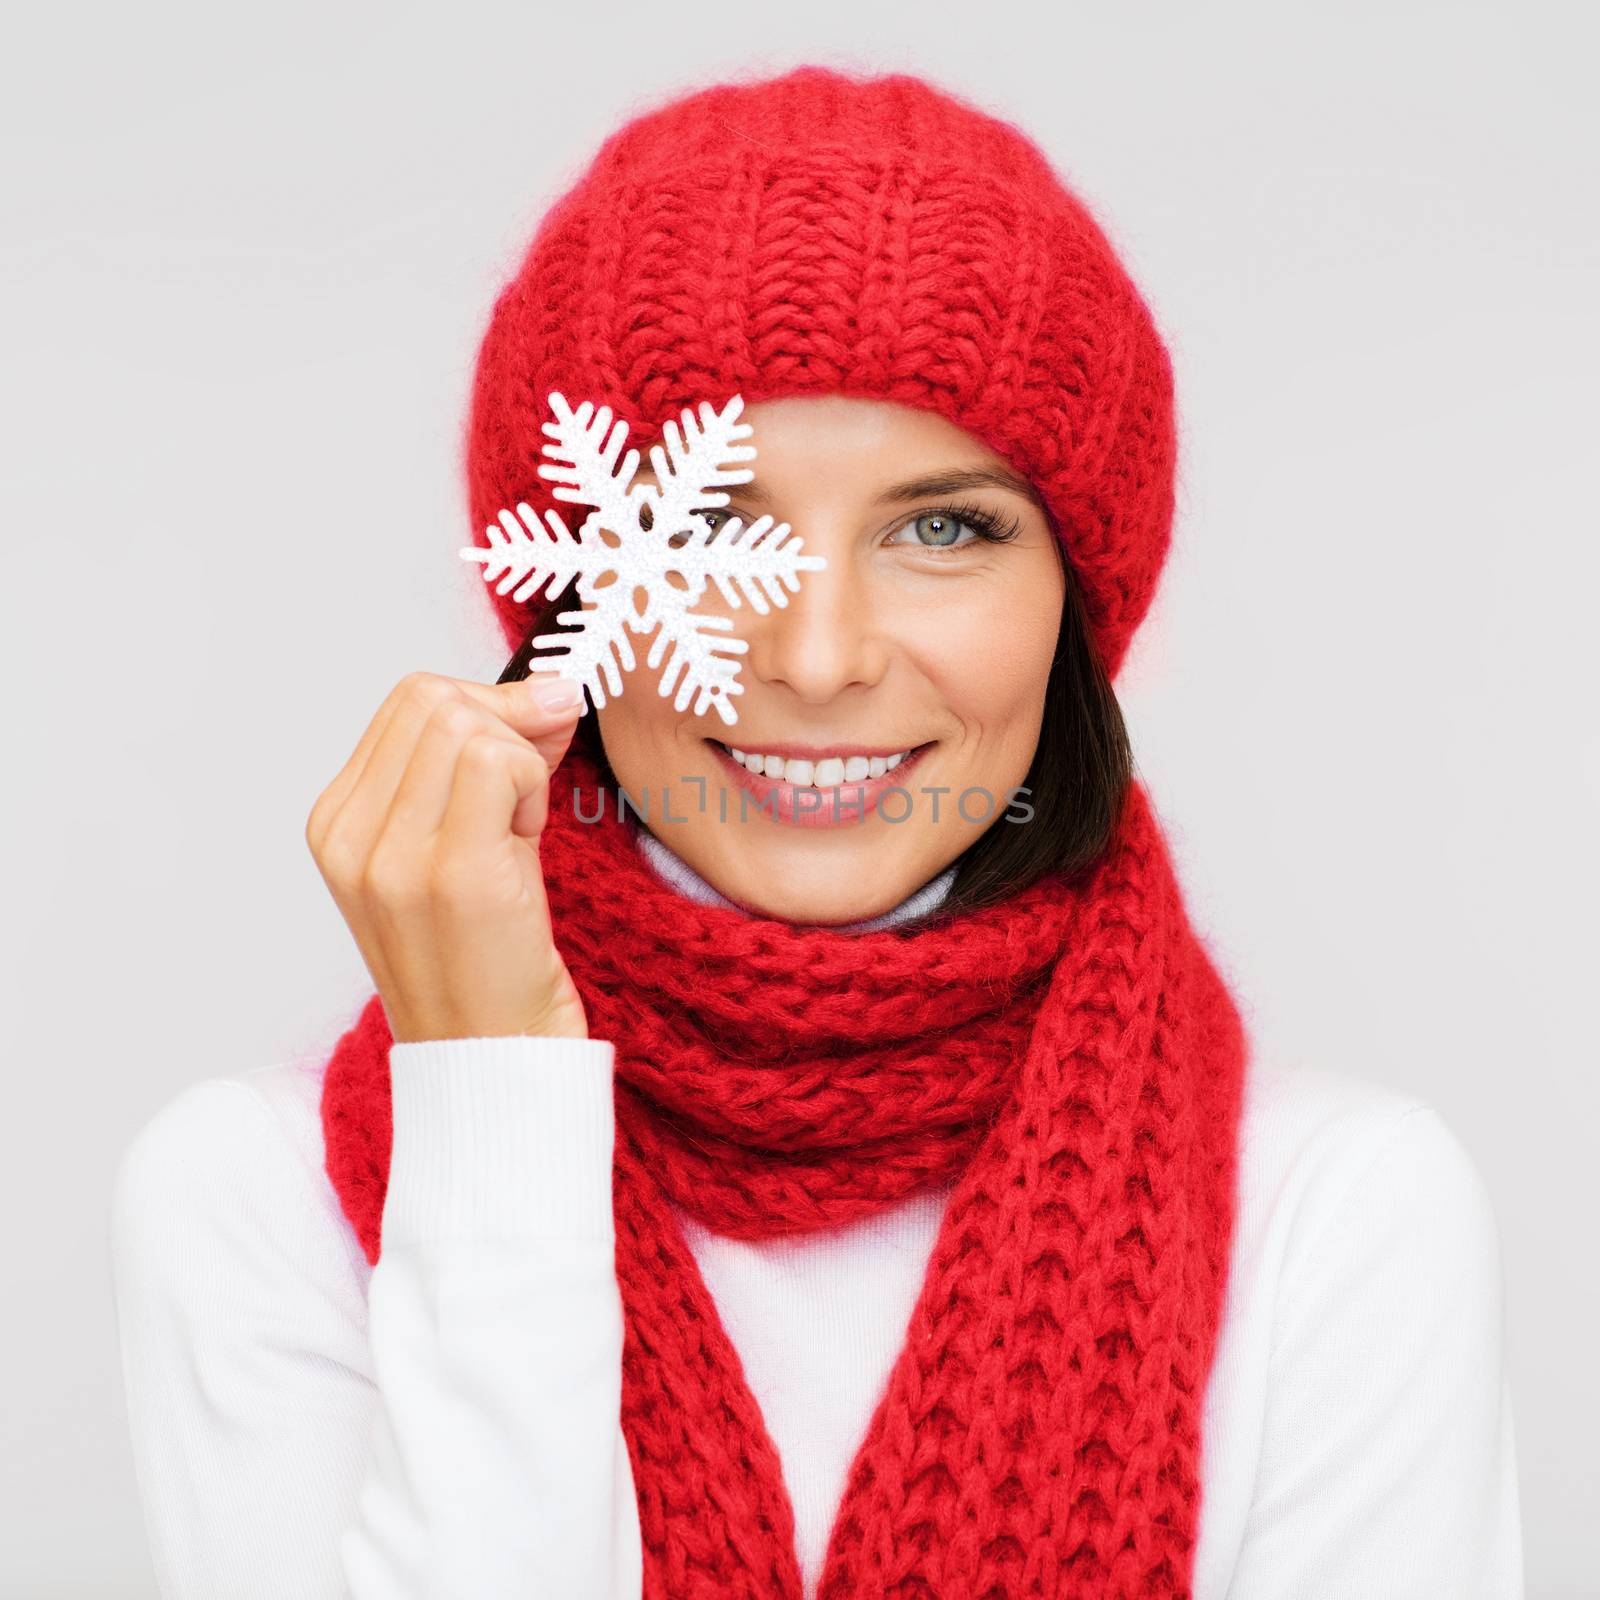 happiness, winter holidays, christmas and people concept - smiling young woman in red hat, scarf and mittens covering one eye with snowflake decoration over gray background